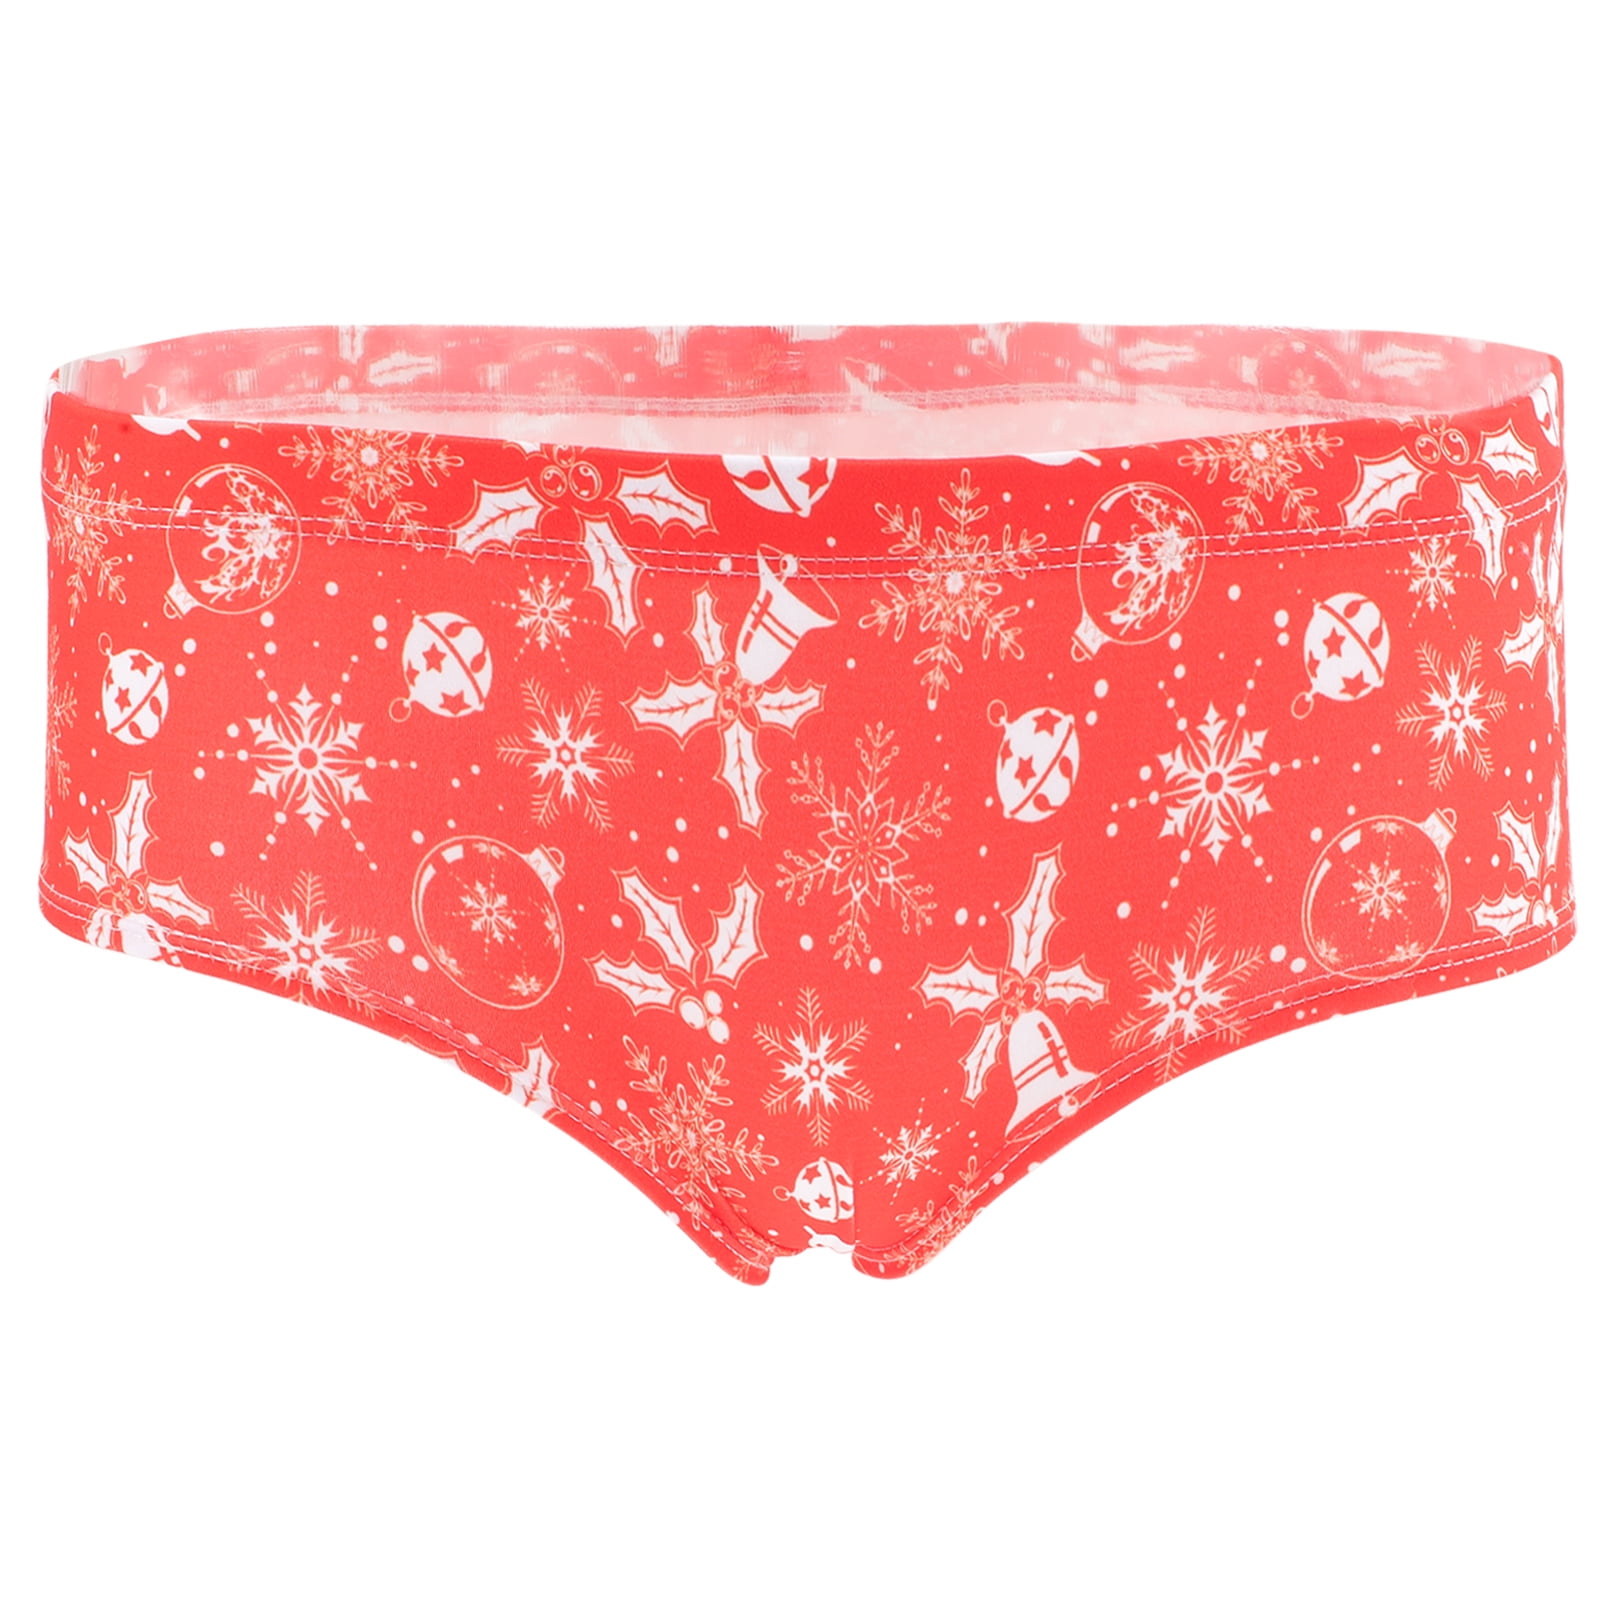 Christmas Theme Panties Underpants Underwear Breathable Briefs for